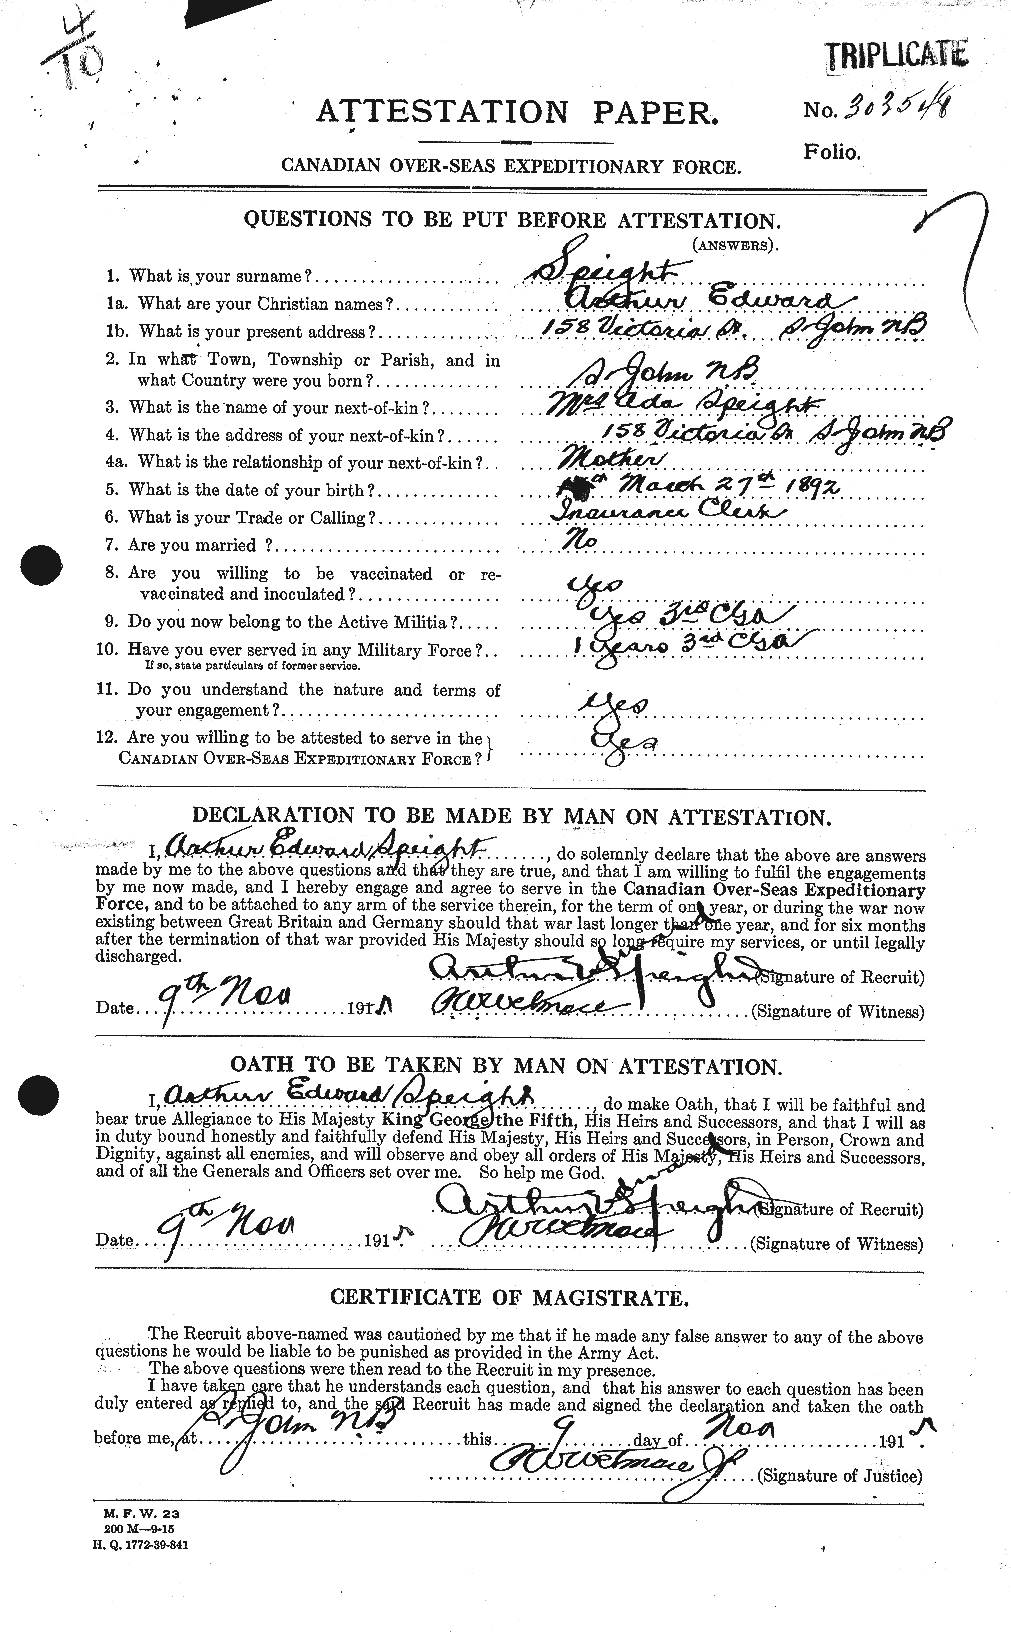 Personnel Records of the First World War - CEF 110083a